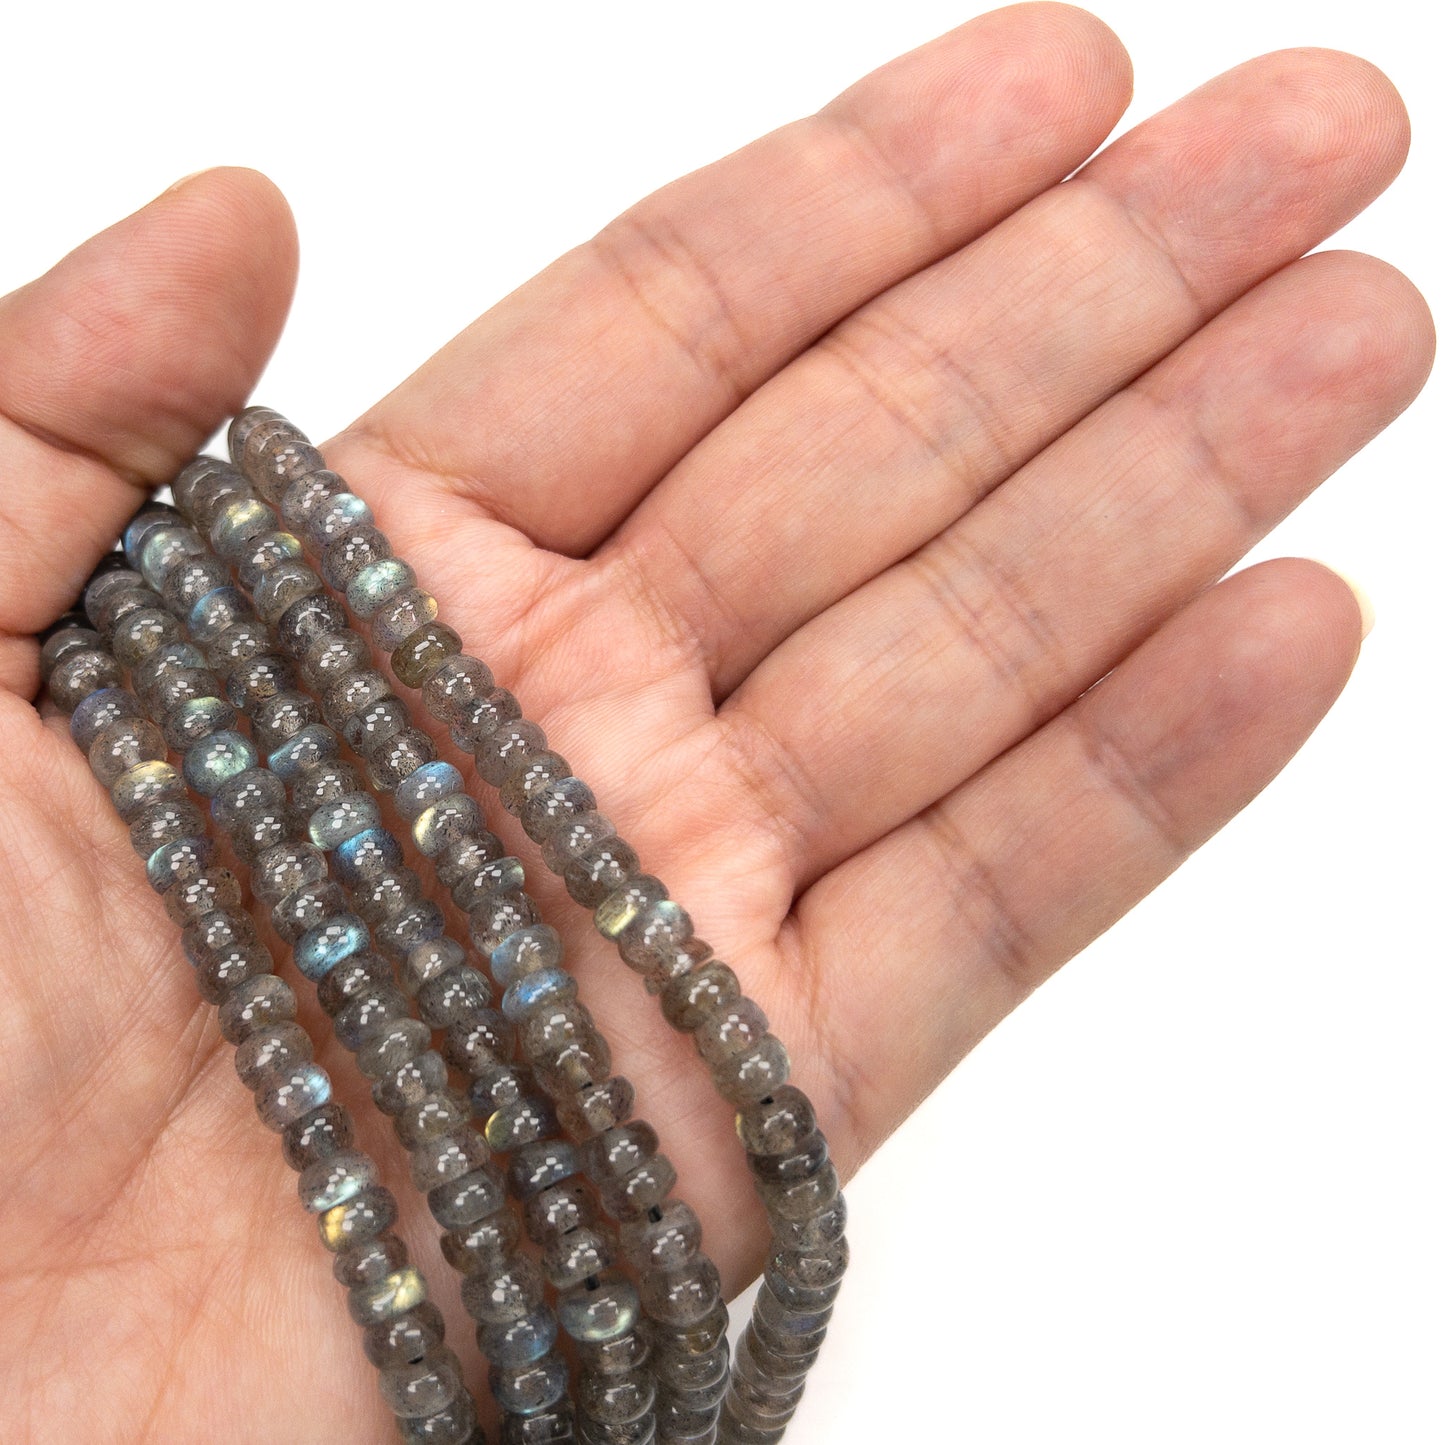 Labradorite 6mm Smooth Slice Bead (2 Quantities Available)